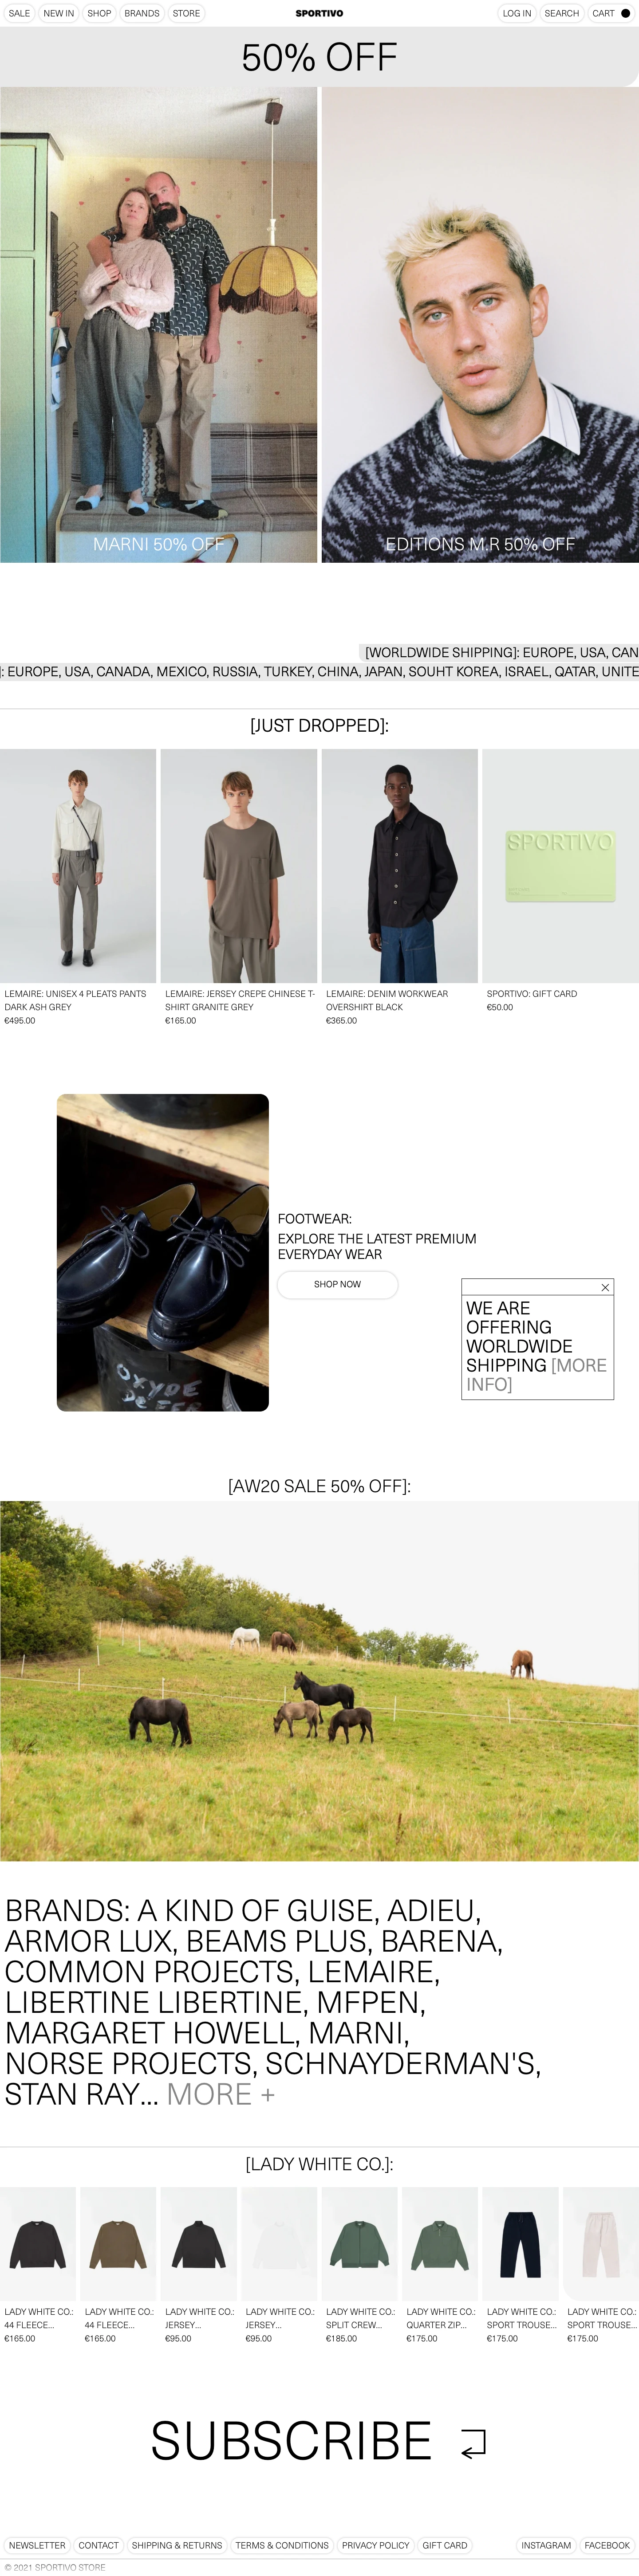 SPORTIVO STORE Landing Page Example: Premium casual and sportswear. Brands: A Kind of Guise, Adieu, Armor Lux, Aspesi, Barena, Dr. Bronner's, Dreamland Syndicate, Études, Good News, Jeanerica, Lemaire, Libertine Libertine, MFPEN, Margaret Howell, Marni, Modest+Humble, Norse Projects, Paraboot, Patagonia, PHIPPS International, Schnayderman's, Spring Court.